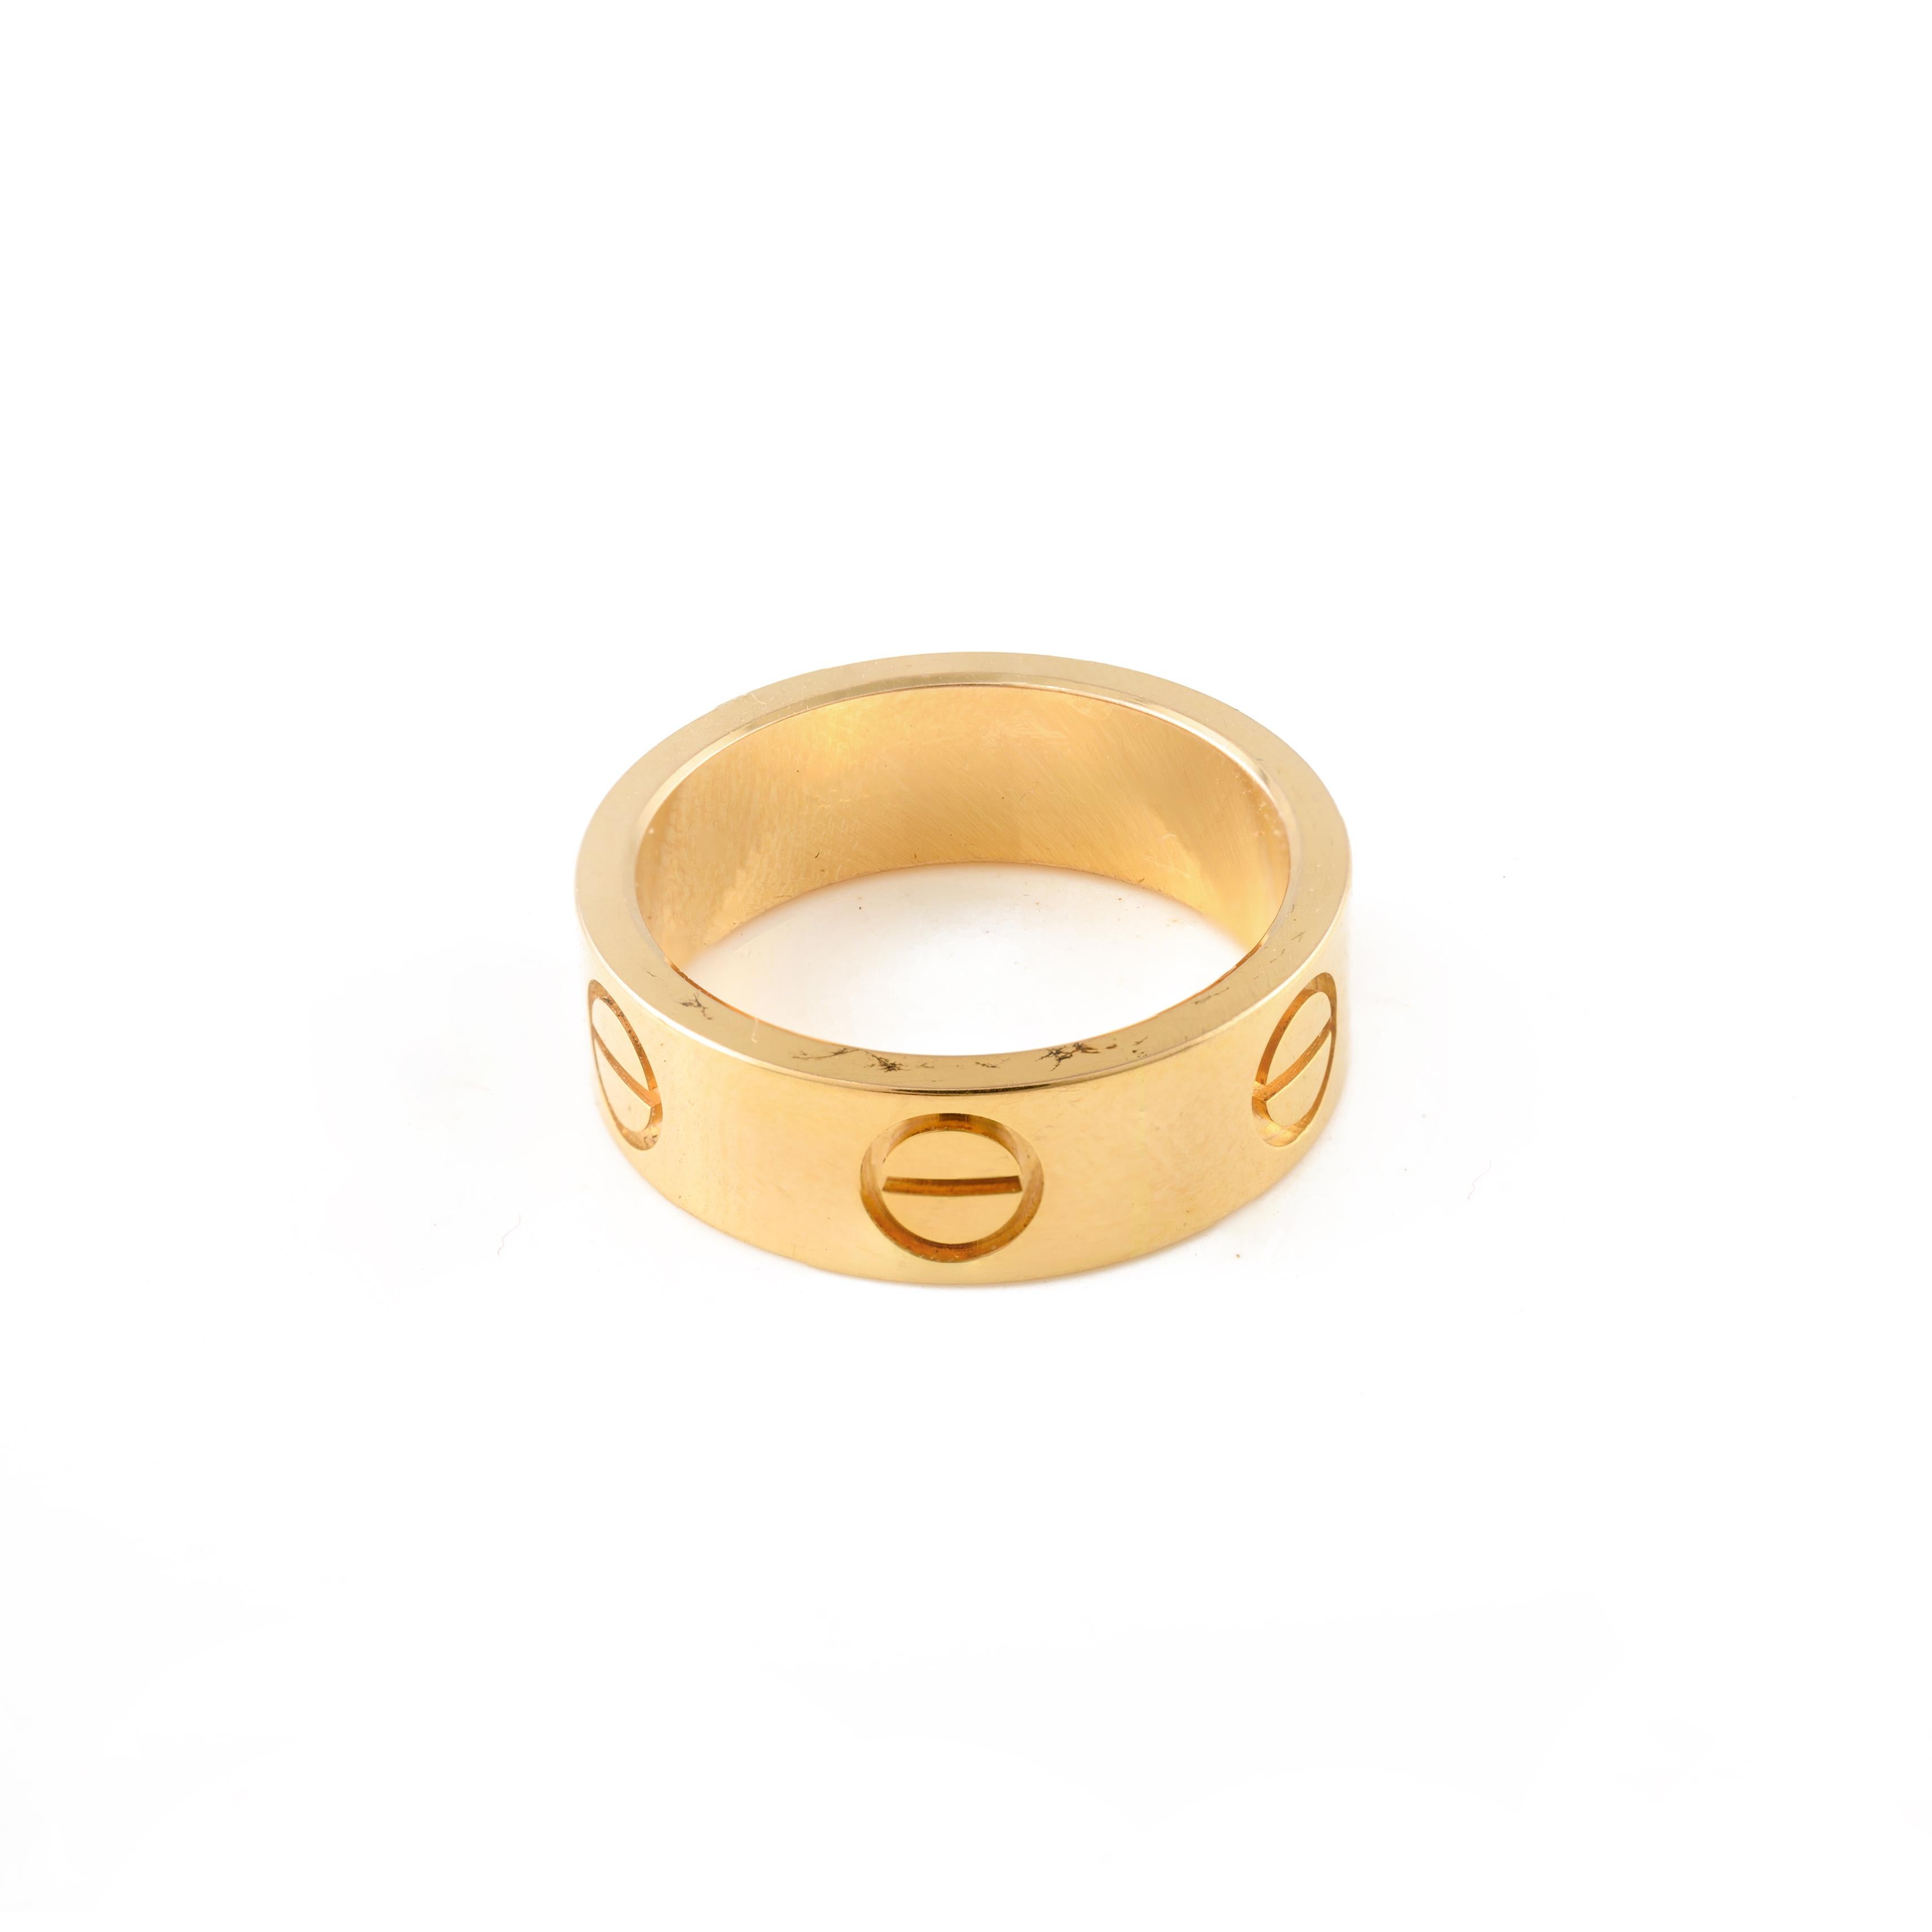 For Sale:  Fine Jewelry 14k Solid Yellow Gold Screw Engraved Love Band Ring 7